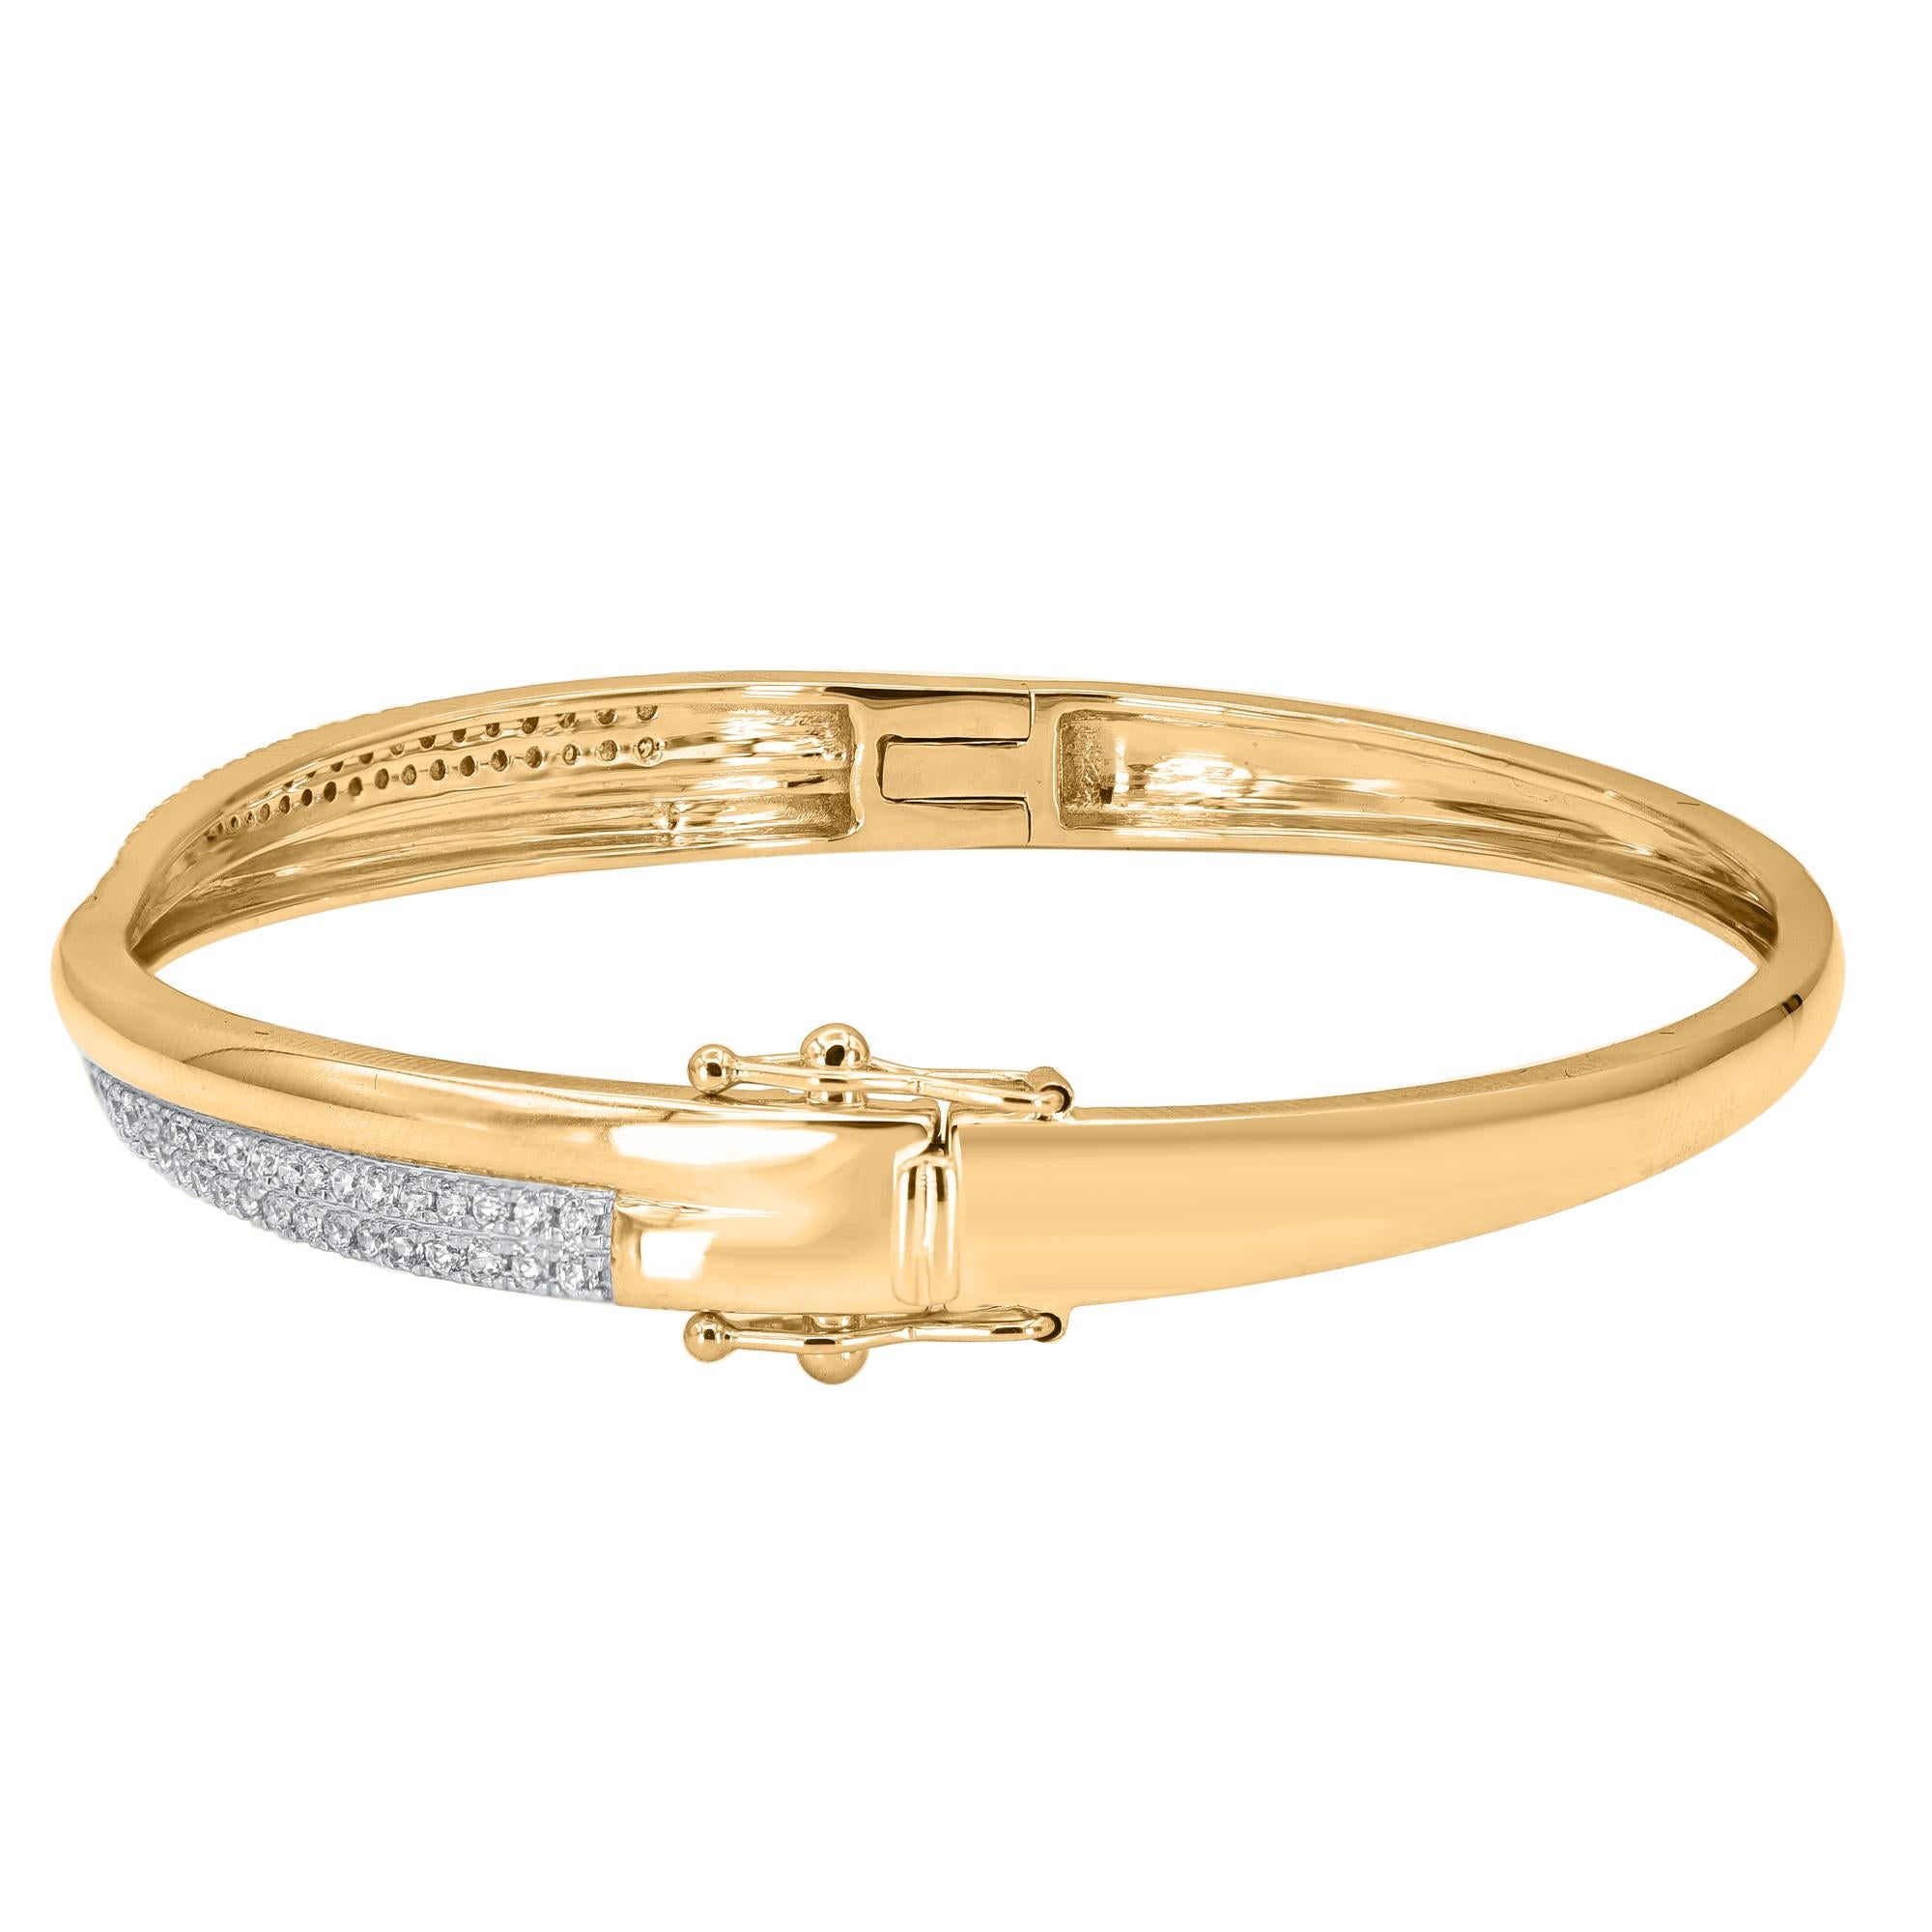 Classic and sophisticated, this diamond bangle bracelet pairs well with any attire.
This Shimmering bangle bracelet features 78 natural single cut & brilliant cut diamonds in prong setting and crafted in 14 kt yellow gold. Diamonds are graded H-I